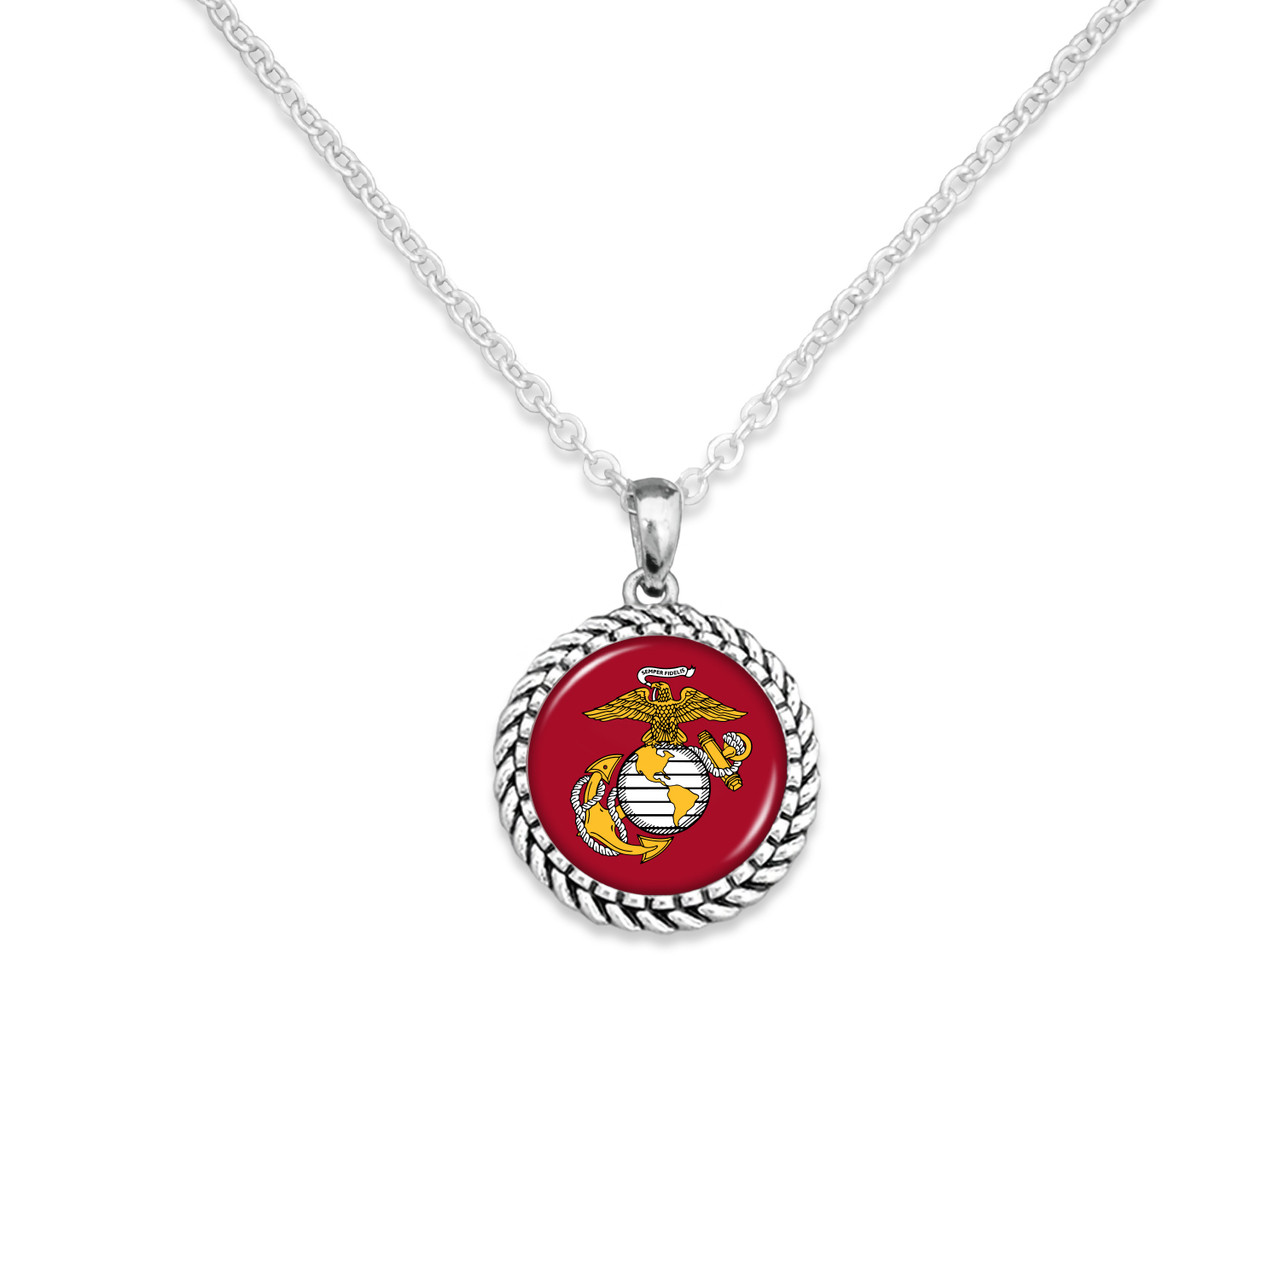 U.S. Marines® Collection & Home of the Free Collection- U.S. Marines® Necklace - Rope Edge